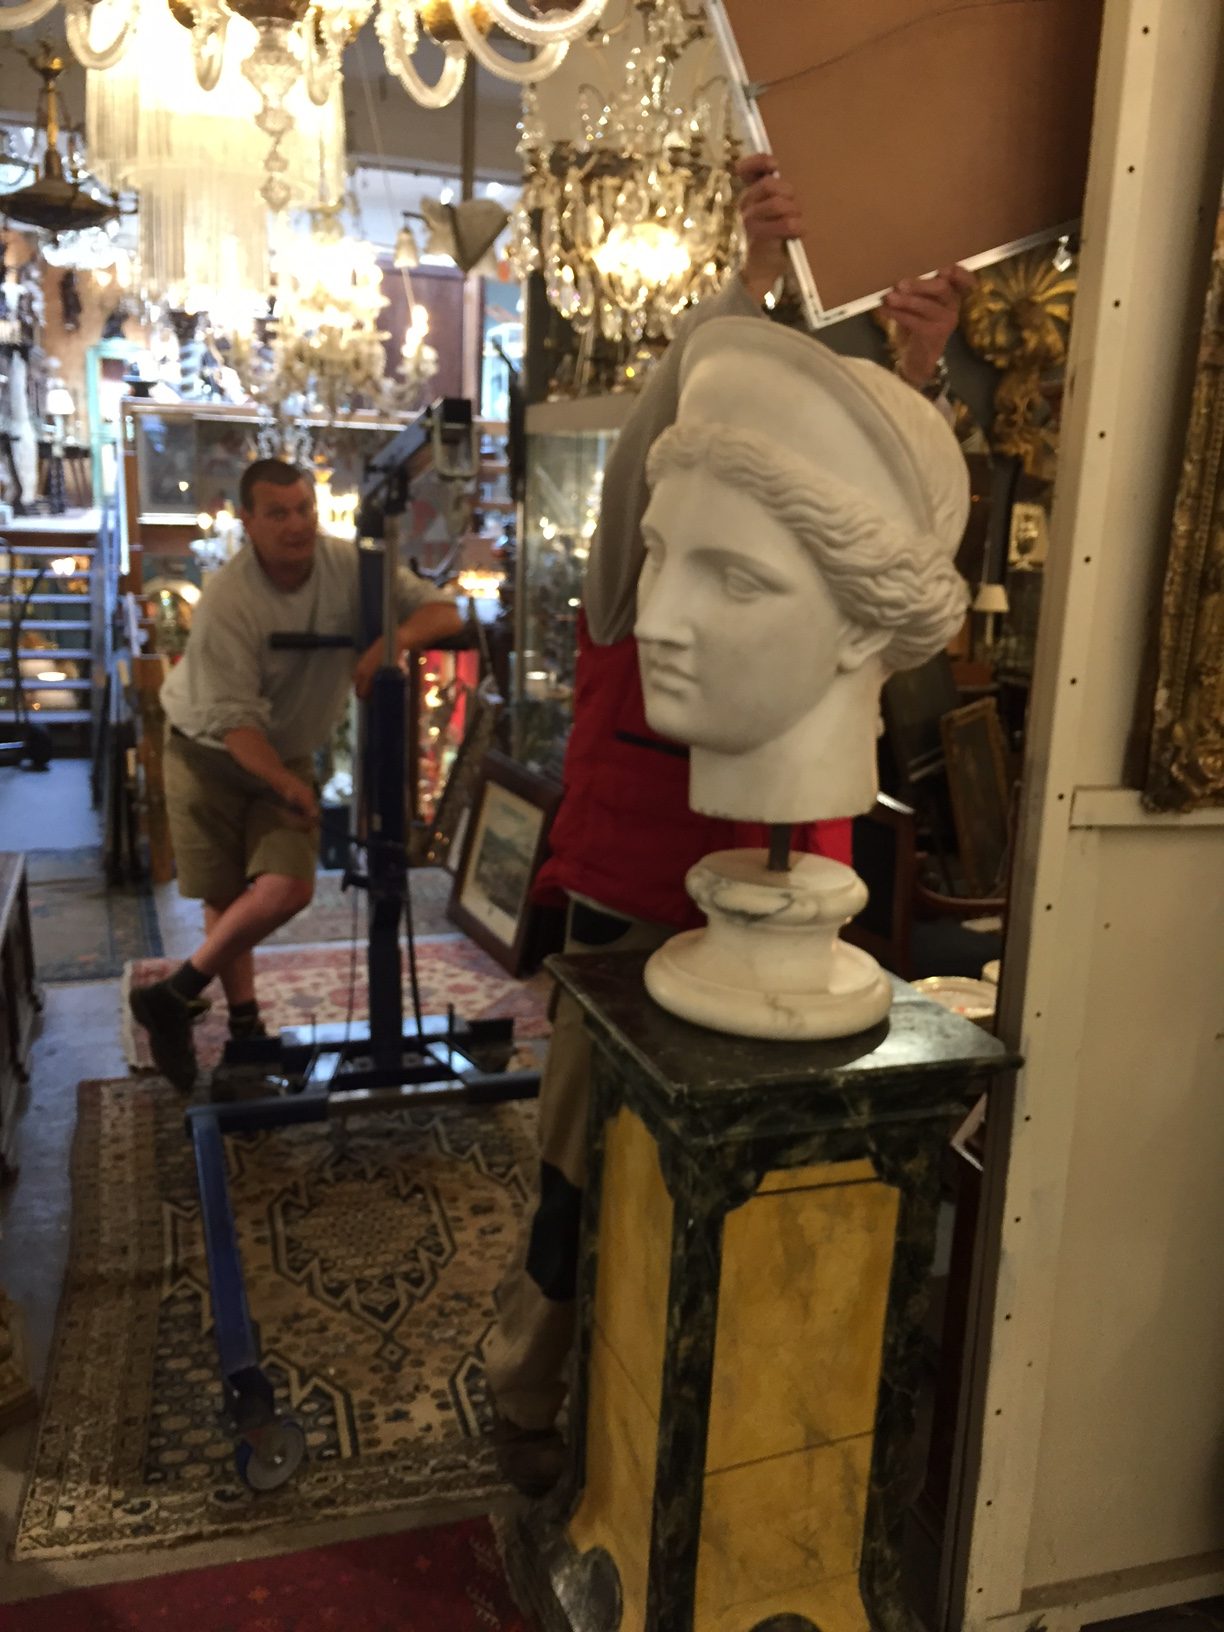 How to ship large fragile antiques: In the shop - Crating, packing and shipping antique statuary